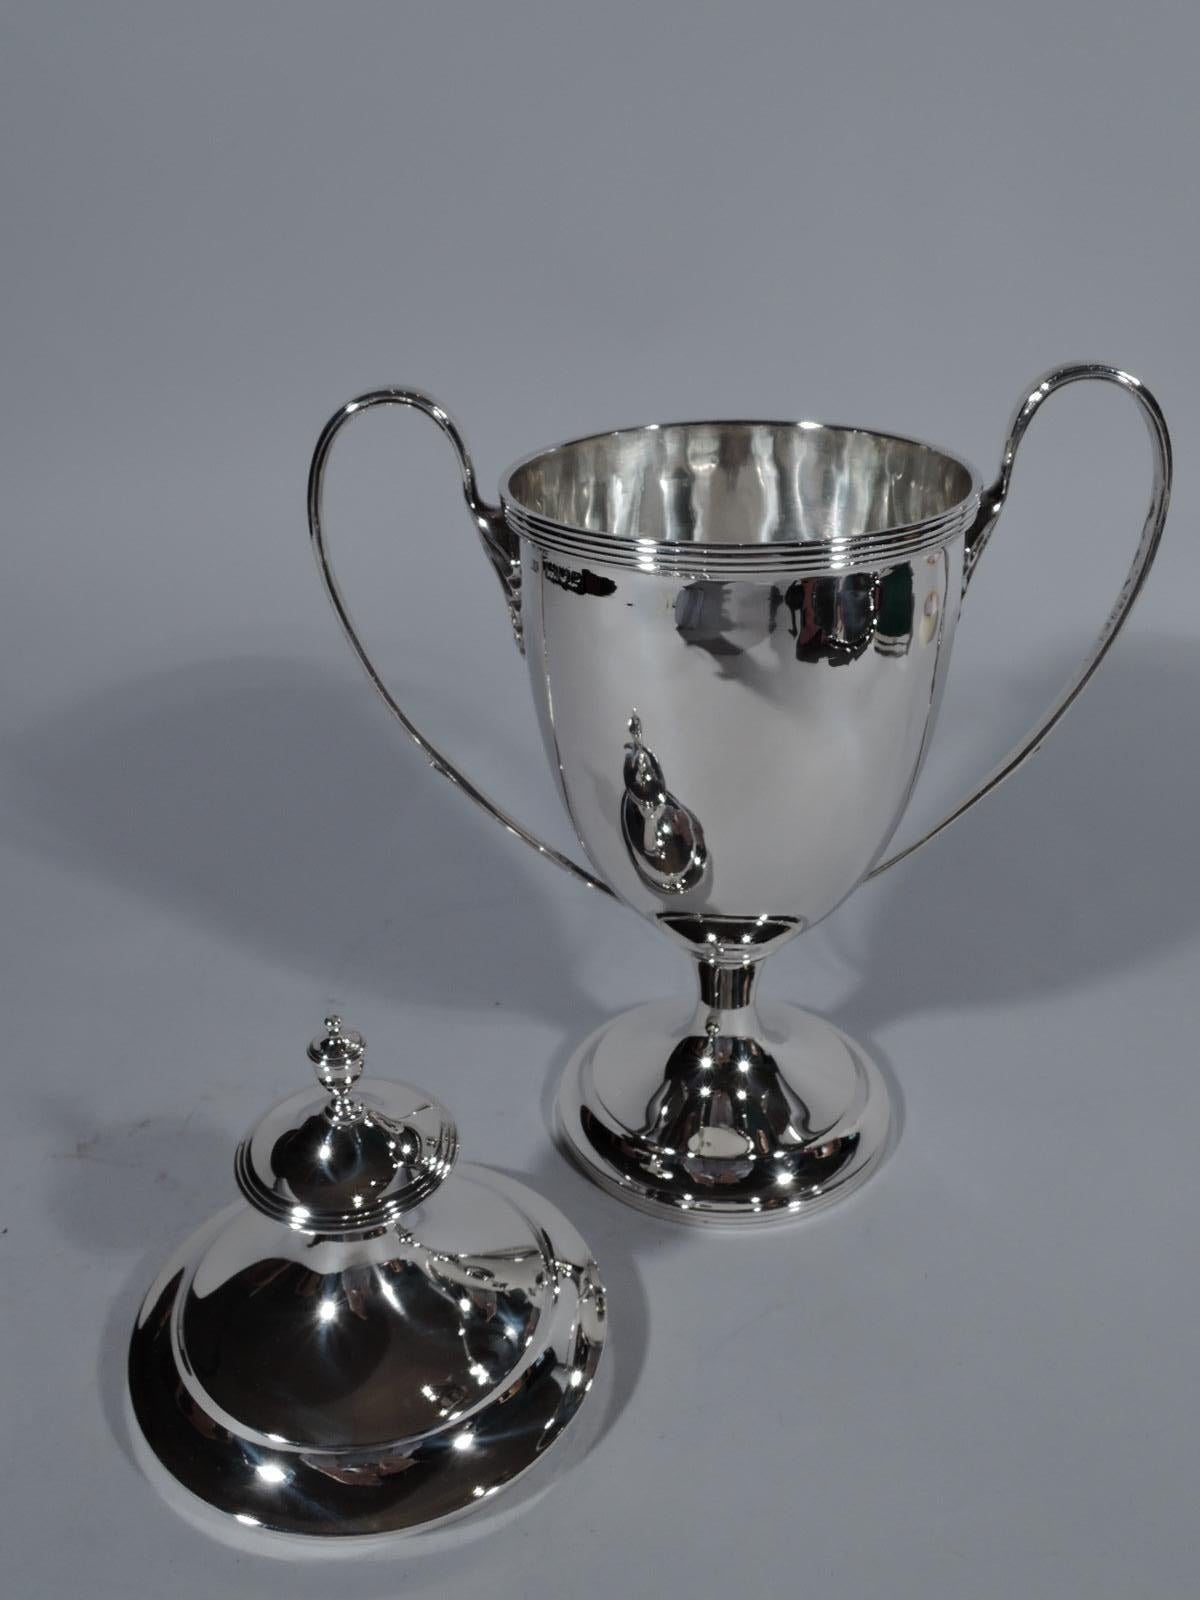 Edwardian neoclassical sterling silver trophy cup. Made by Lionel Alfred Crichton in London in 1910. Elegant amphora vase with oval bowl on spool stem flowing into raised round foot. High-looping side handles with leaf mounts. Cover double domed